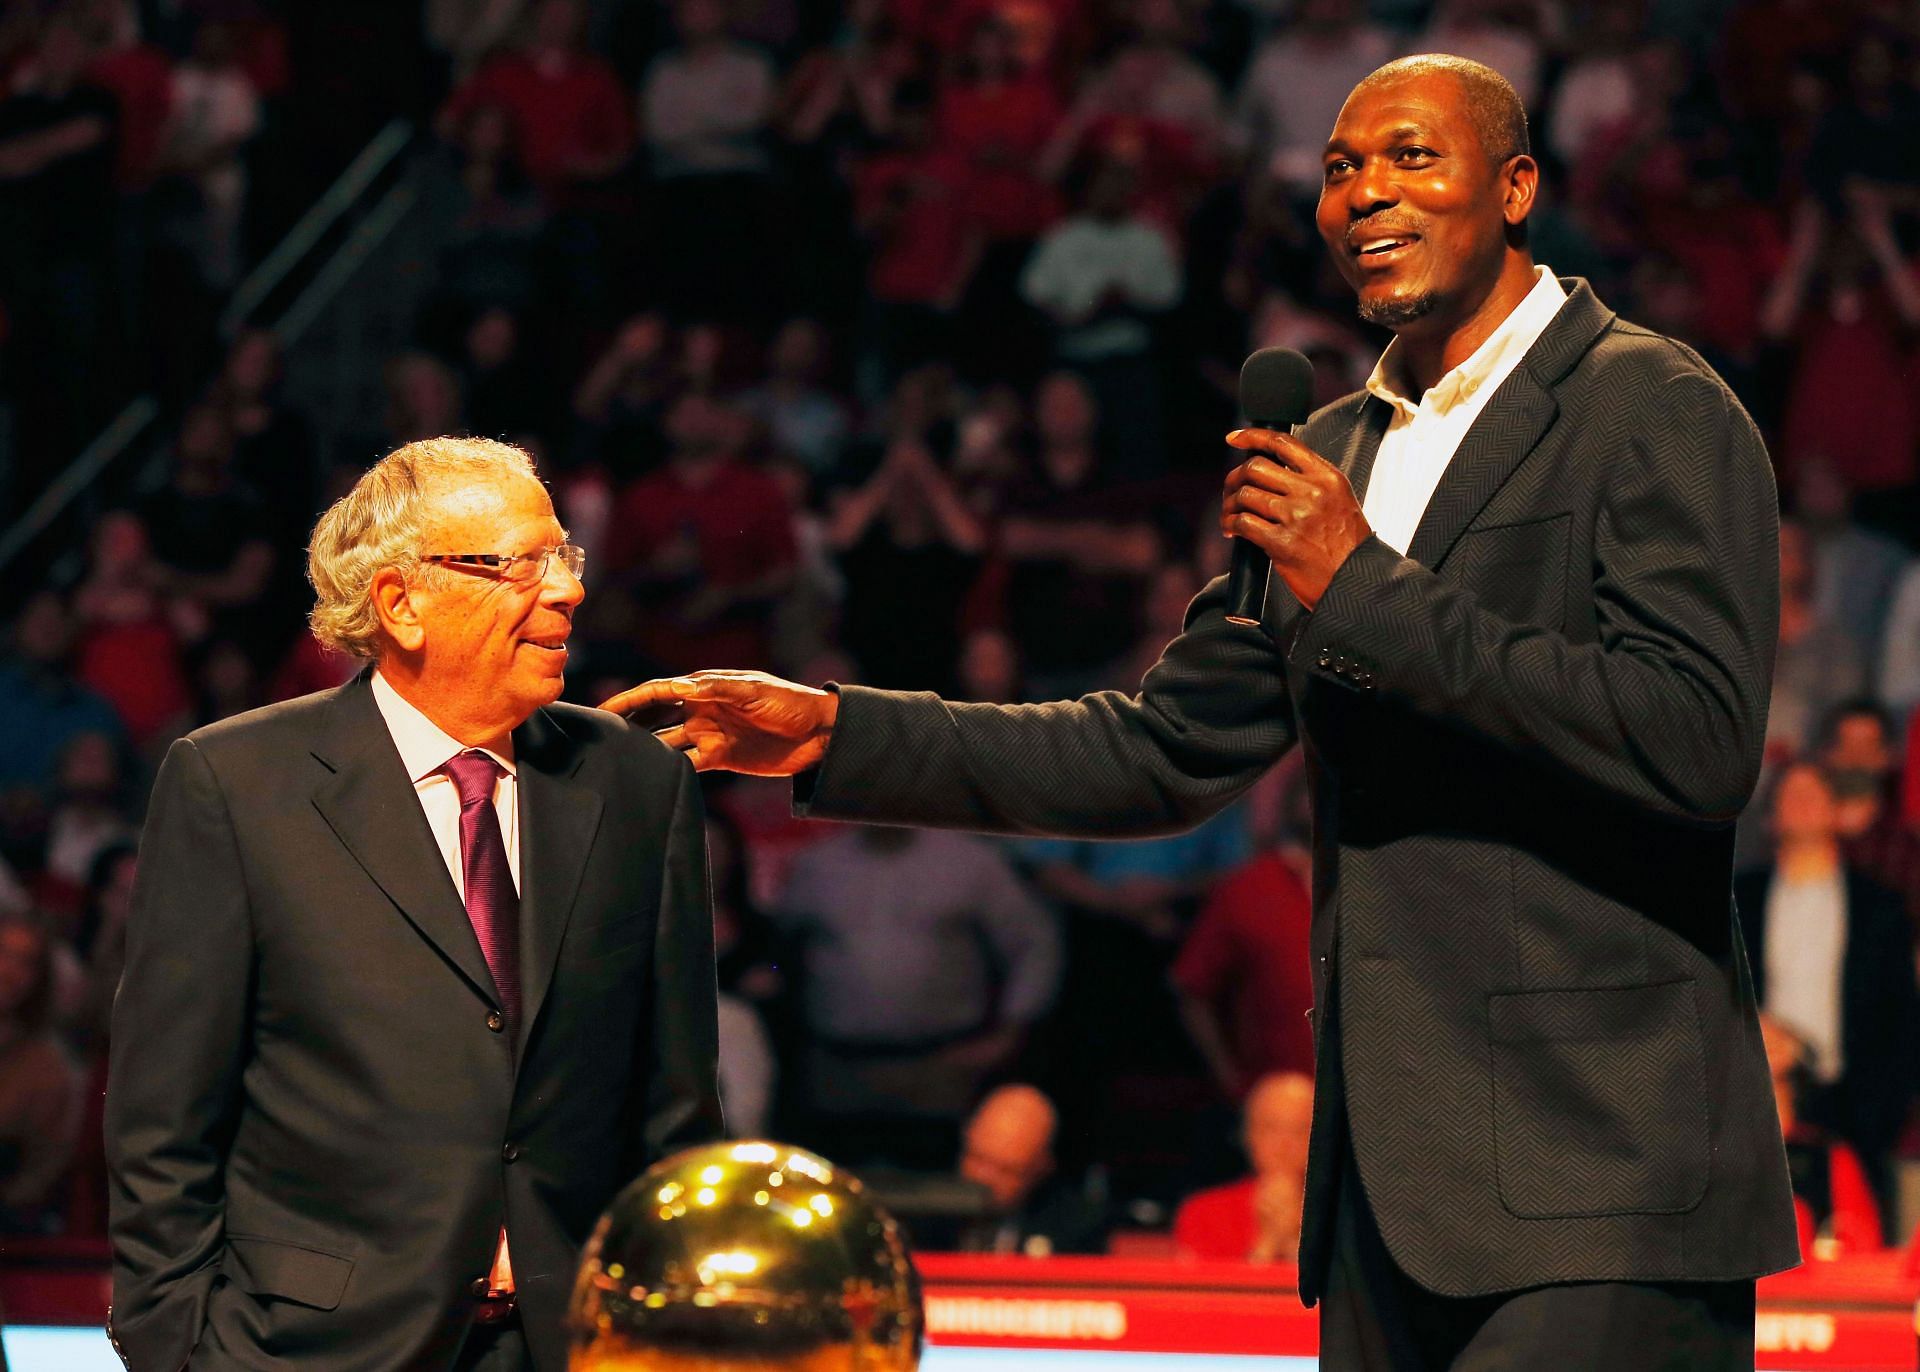 Hakeem Olajuwon is one of the greatest basketball players to ever play for the Houston Rockets